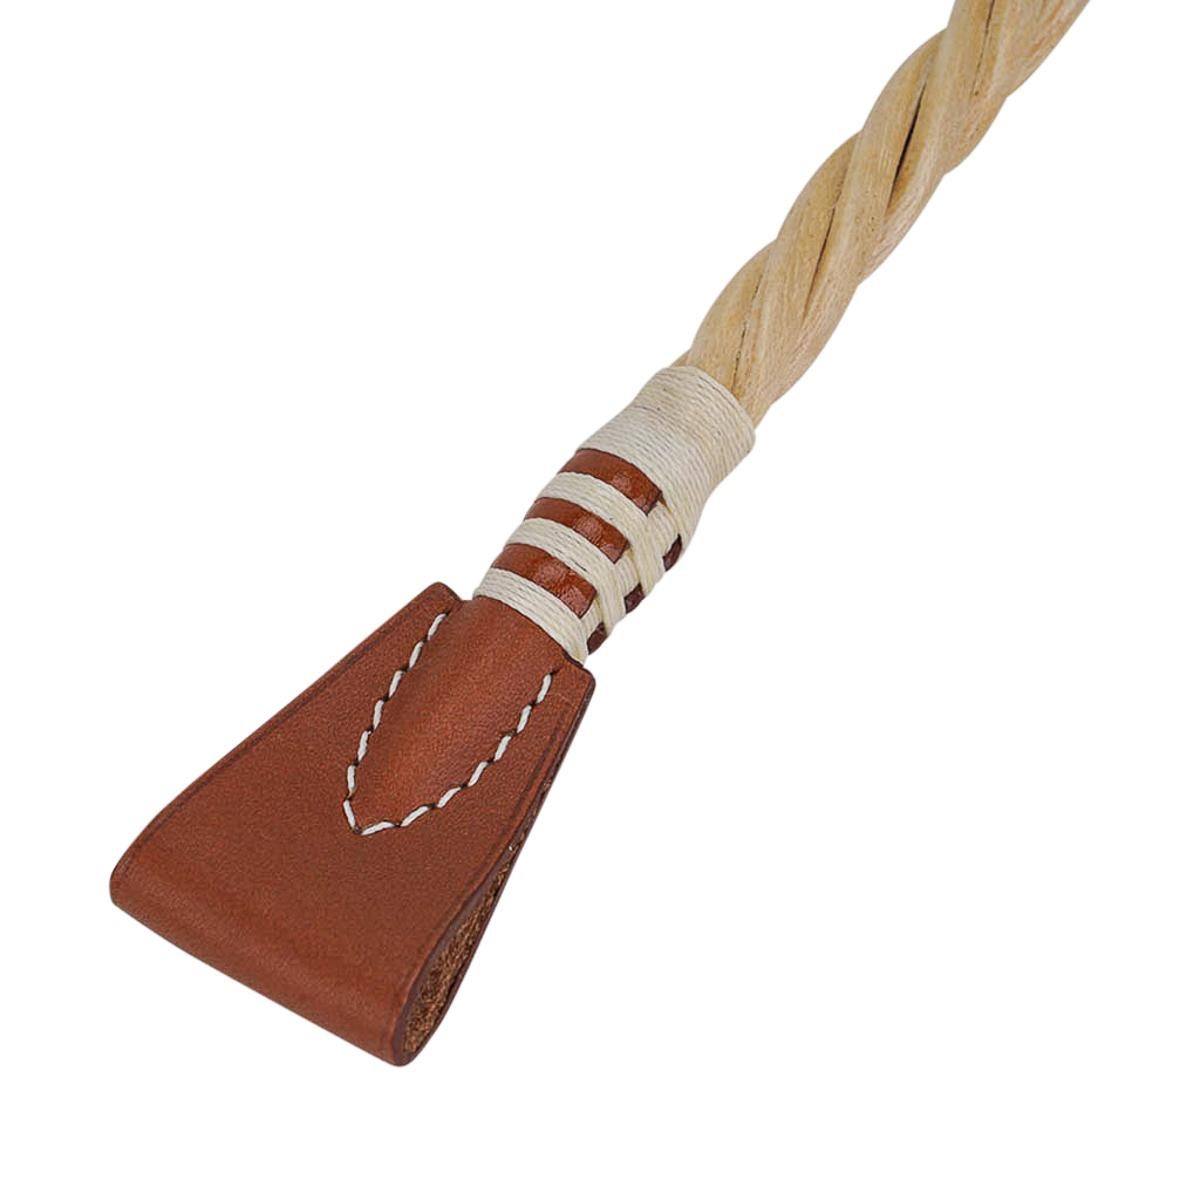 Mightychic offers a rare Hermes Paddock Cravache riding crop bag charm featured in Fauve Vache Hunter leather.
Beautifully detailed hackberry wood.
Stamped Hermes Paris Made in France on the leather.
Charming and playful she easily adorns a myriad